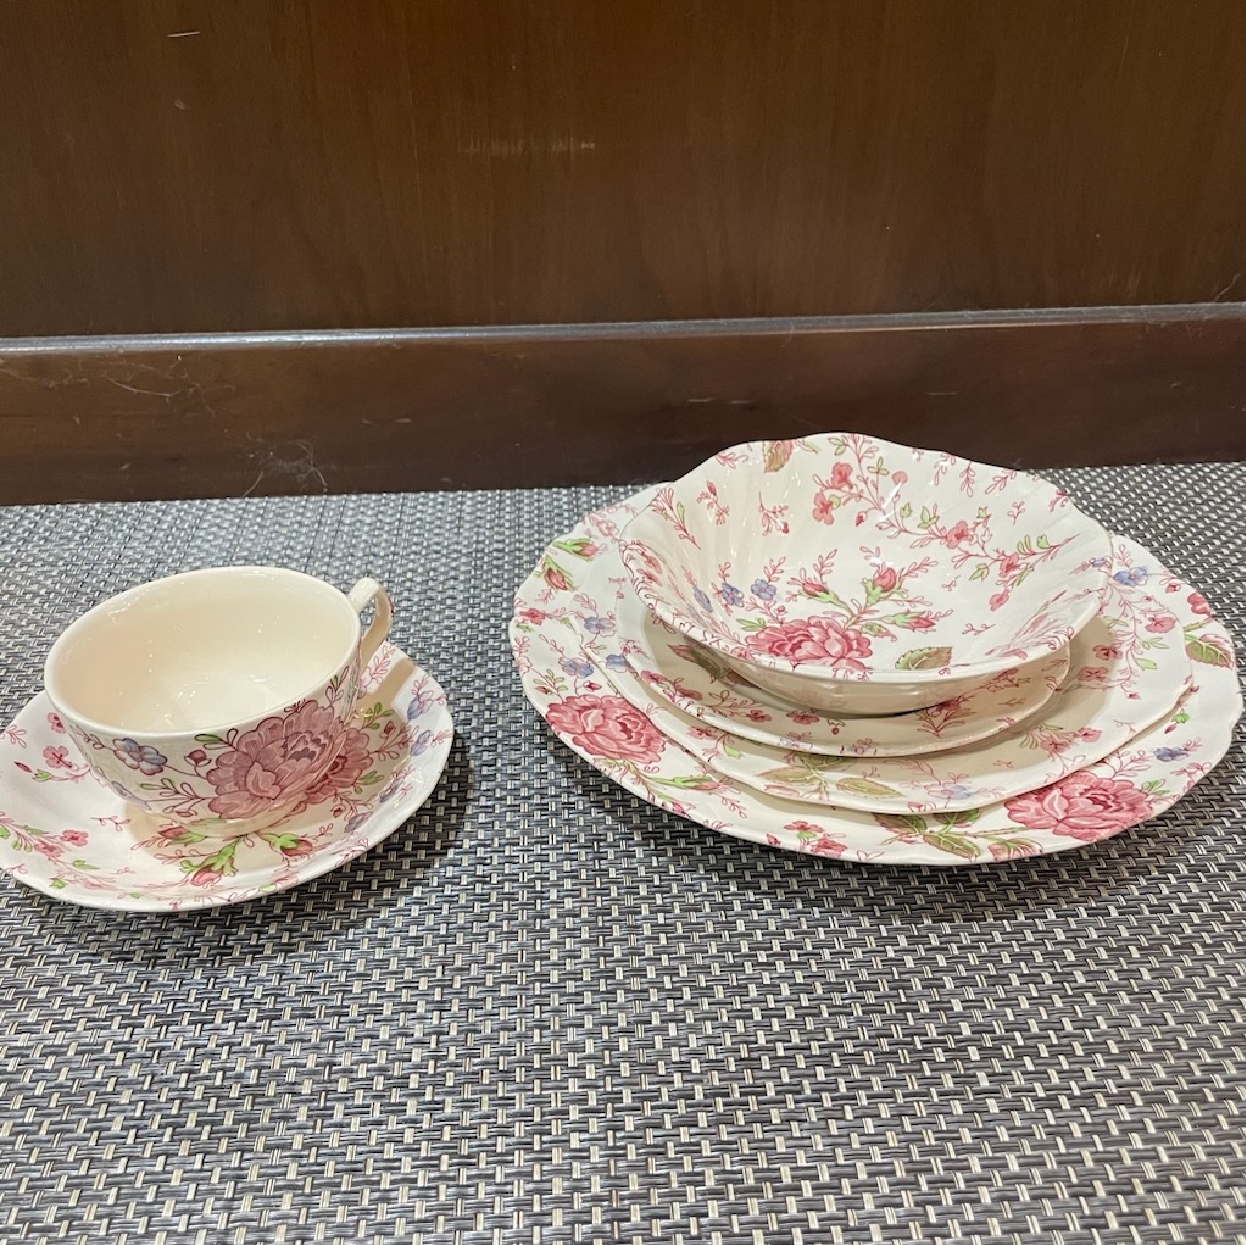 Rose Chintz Made in England by Johnson Bros China Set
33 Pieces Total; Small Chips in a few Pieces